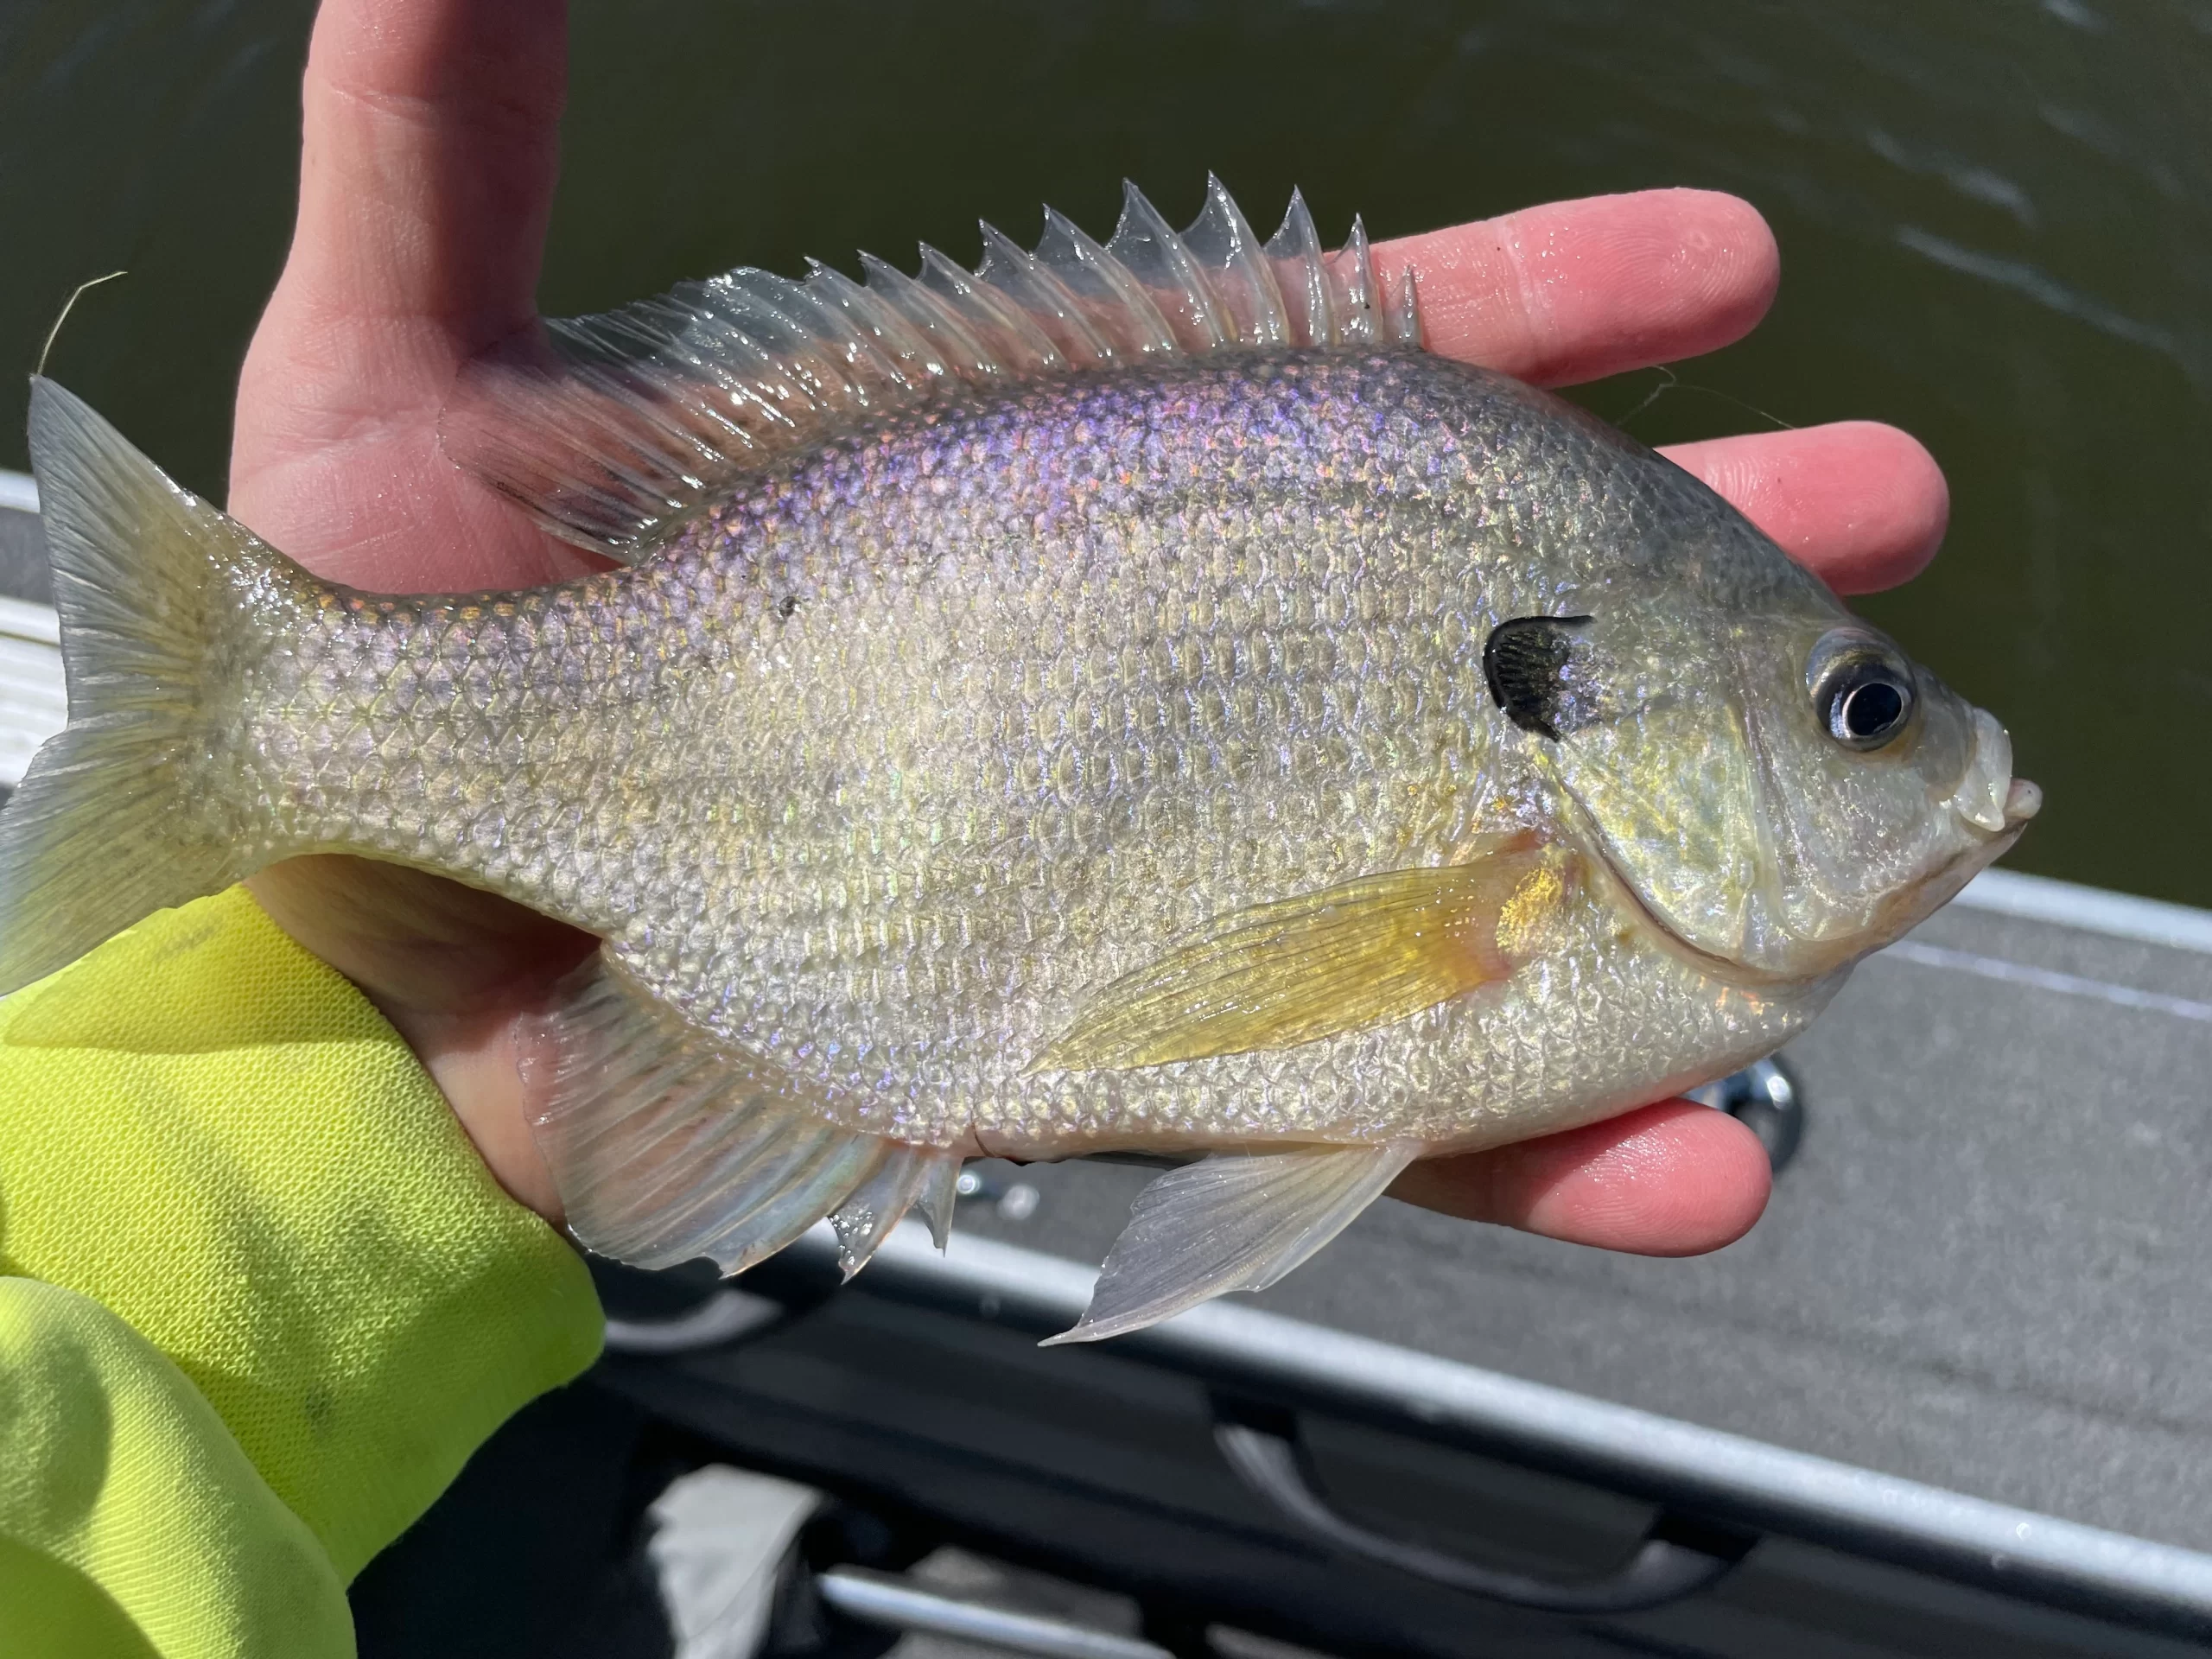 bluegill laying on outstretched hand